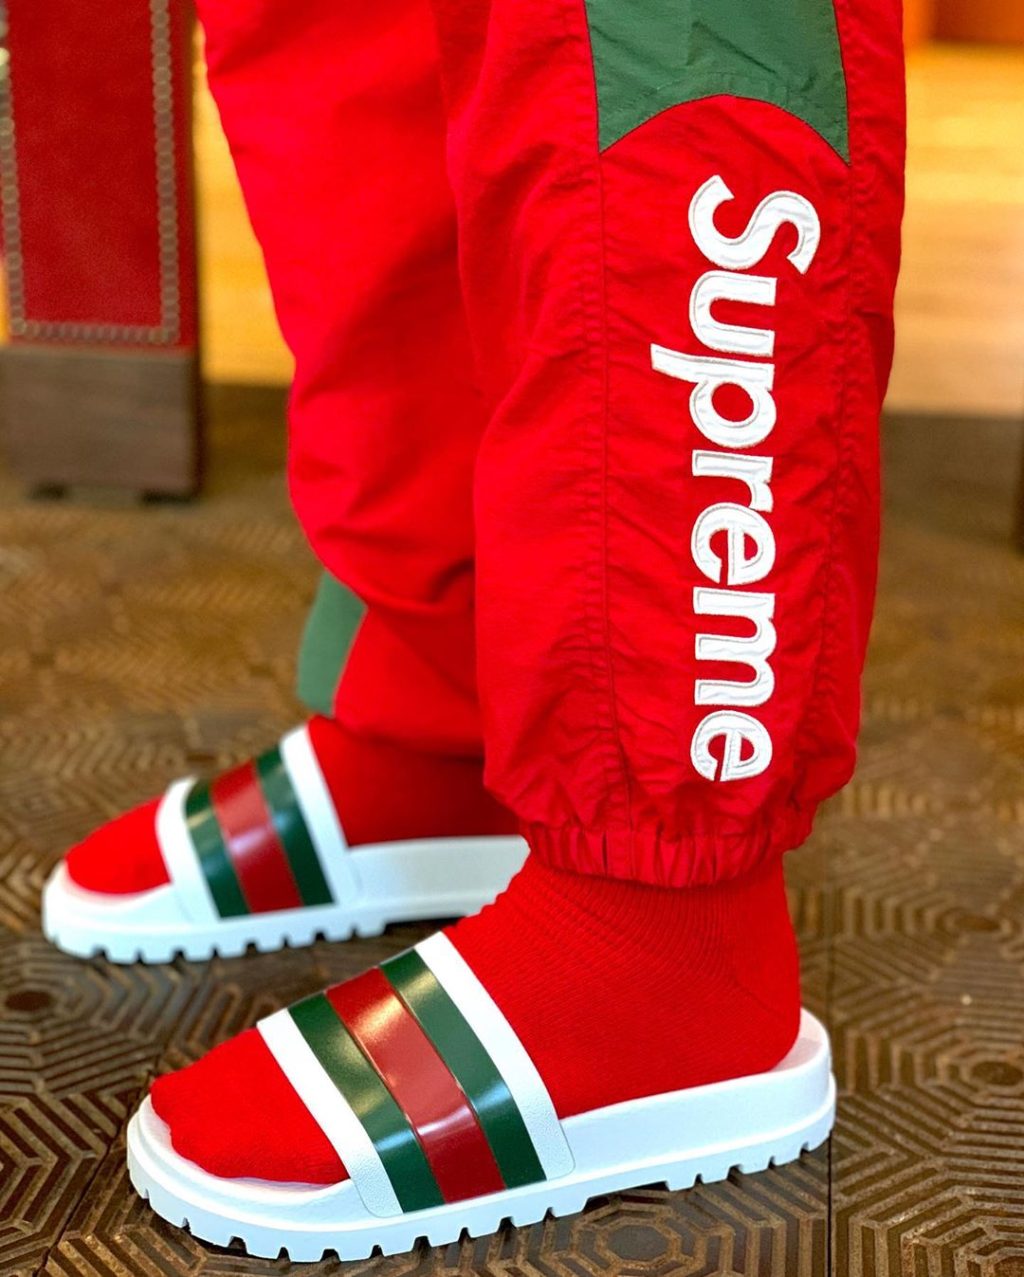 supreme-19aw-19fw-launch-20190824-week1-release-items-snap